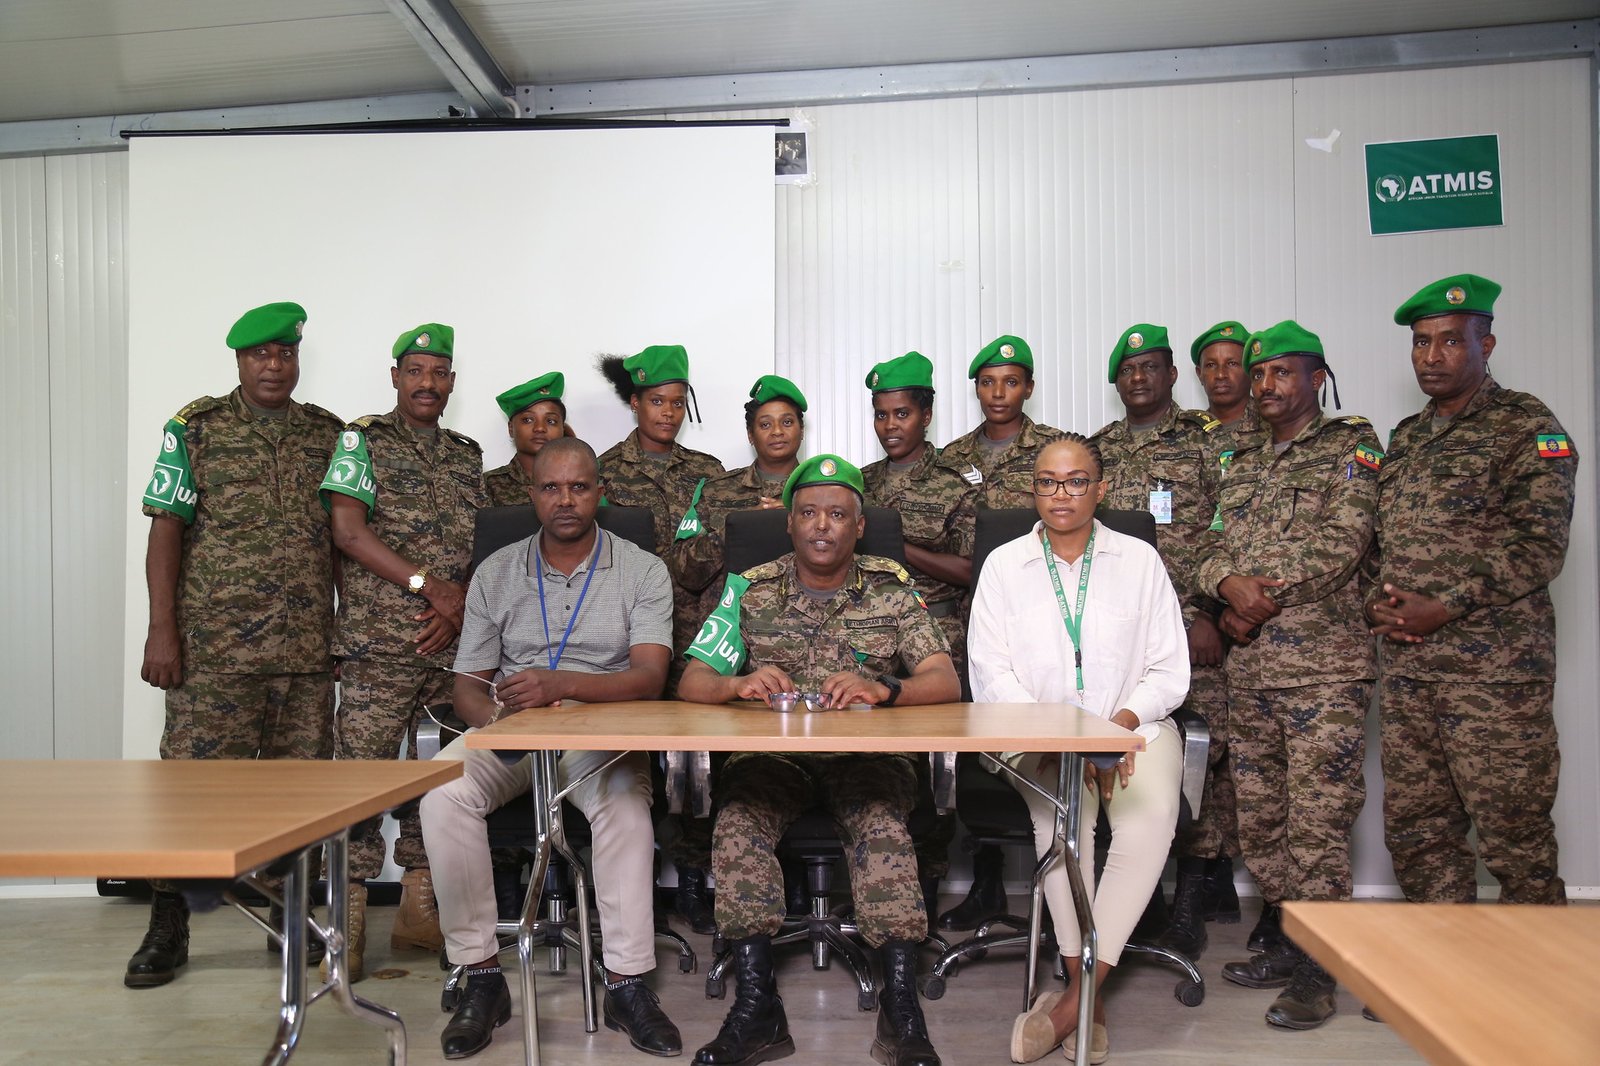 AU Mission in Somalia: Troops Receive Training on Child Protect